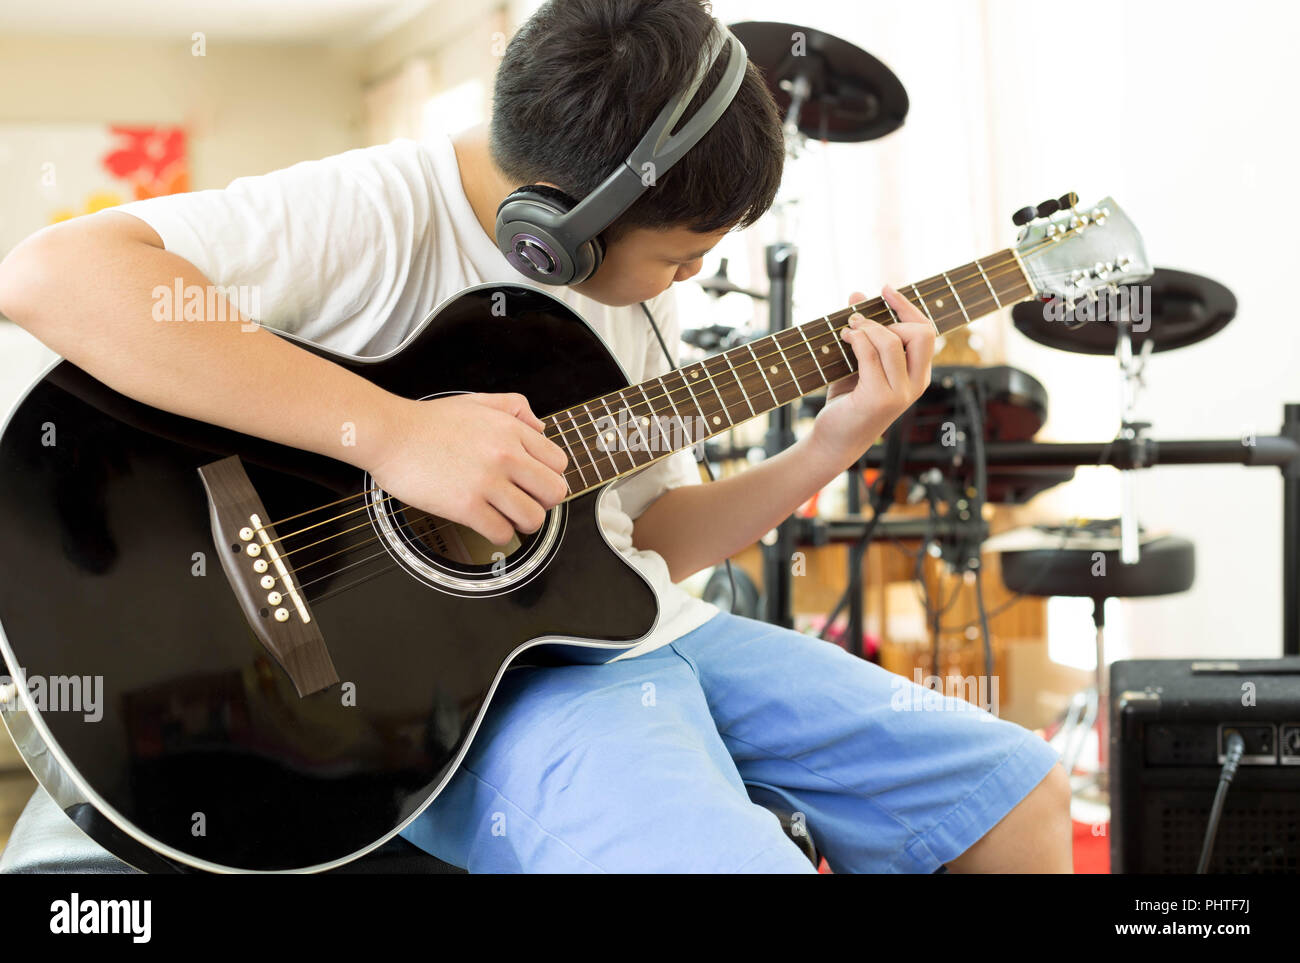 Boy playing a acoustic guitar with headphones on Stock Photo - Alamy